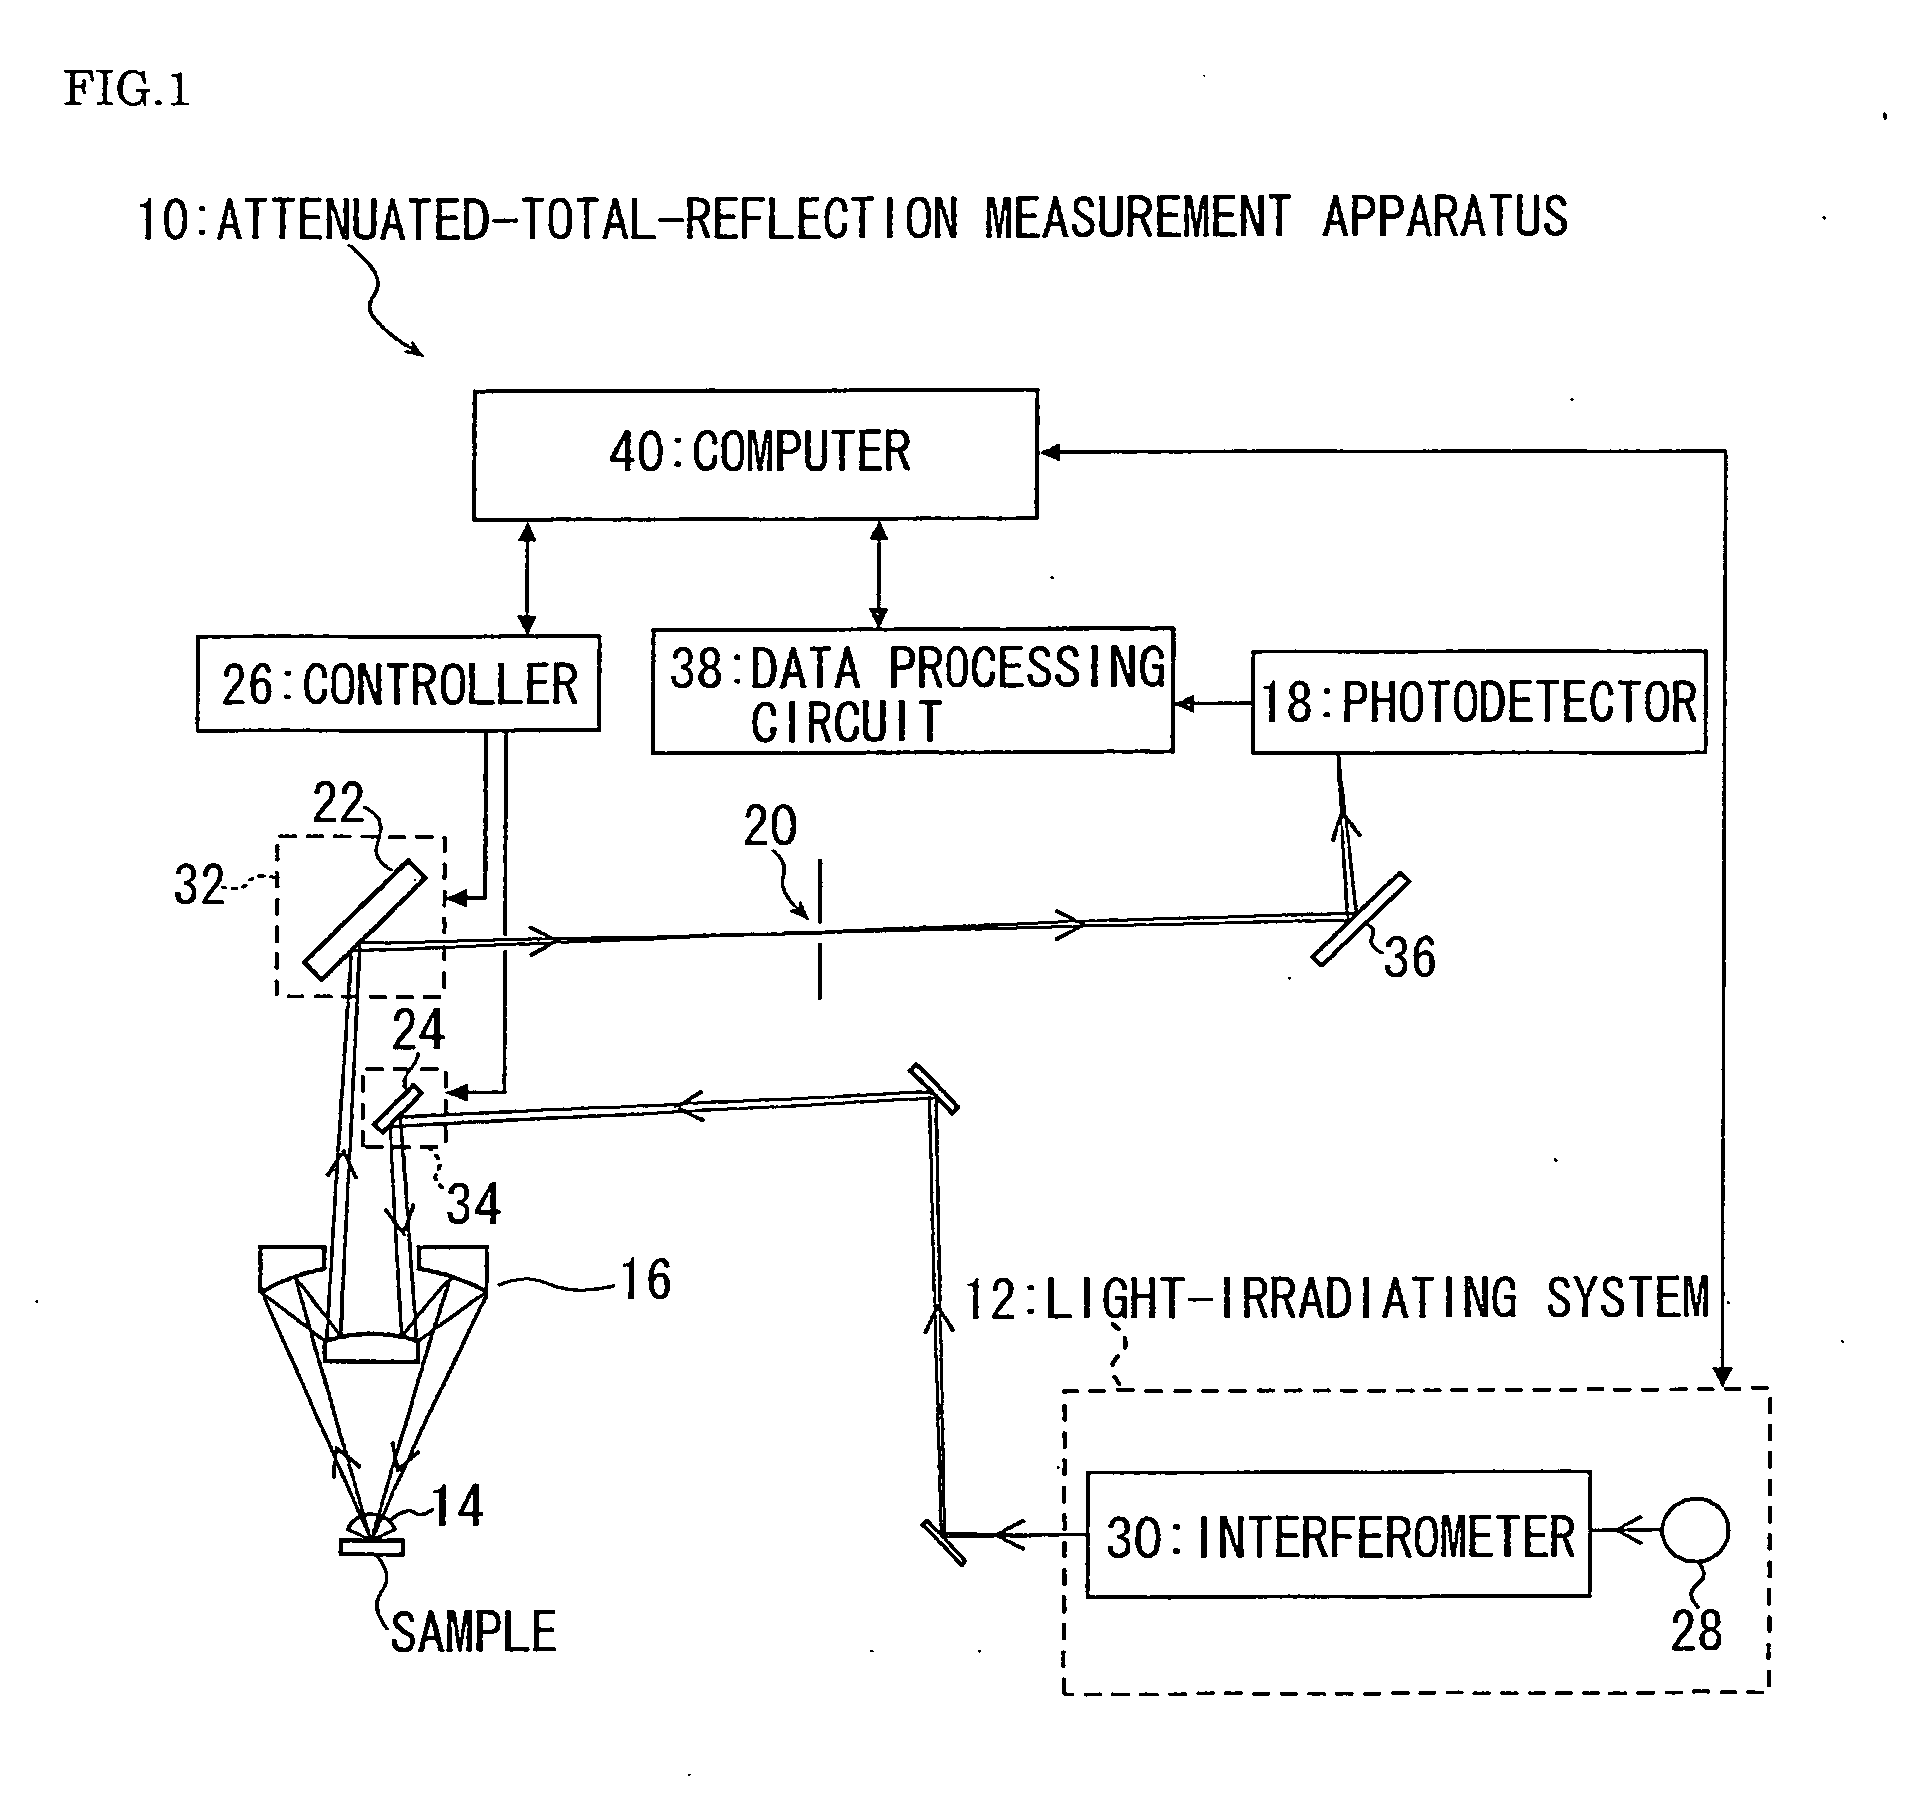 Attenuated-total-reflection measurement apparatus